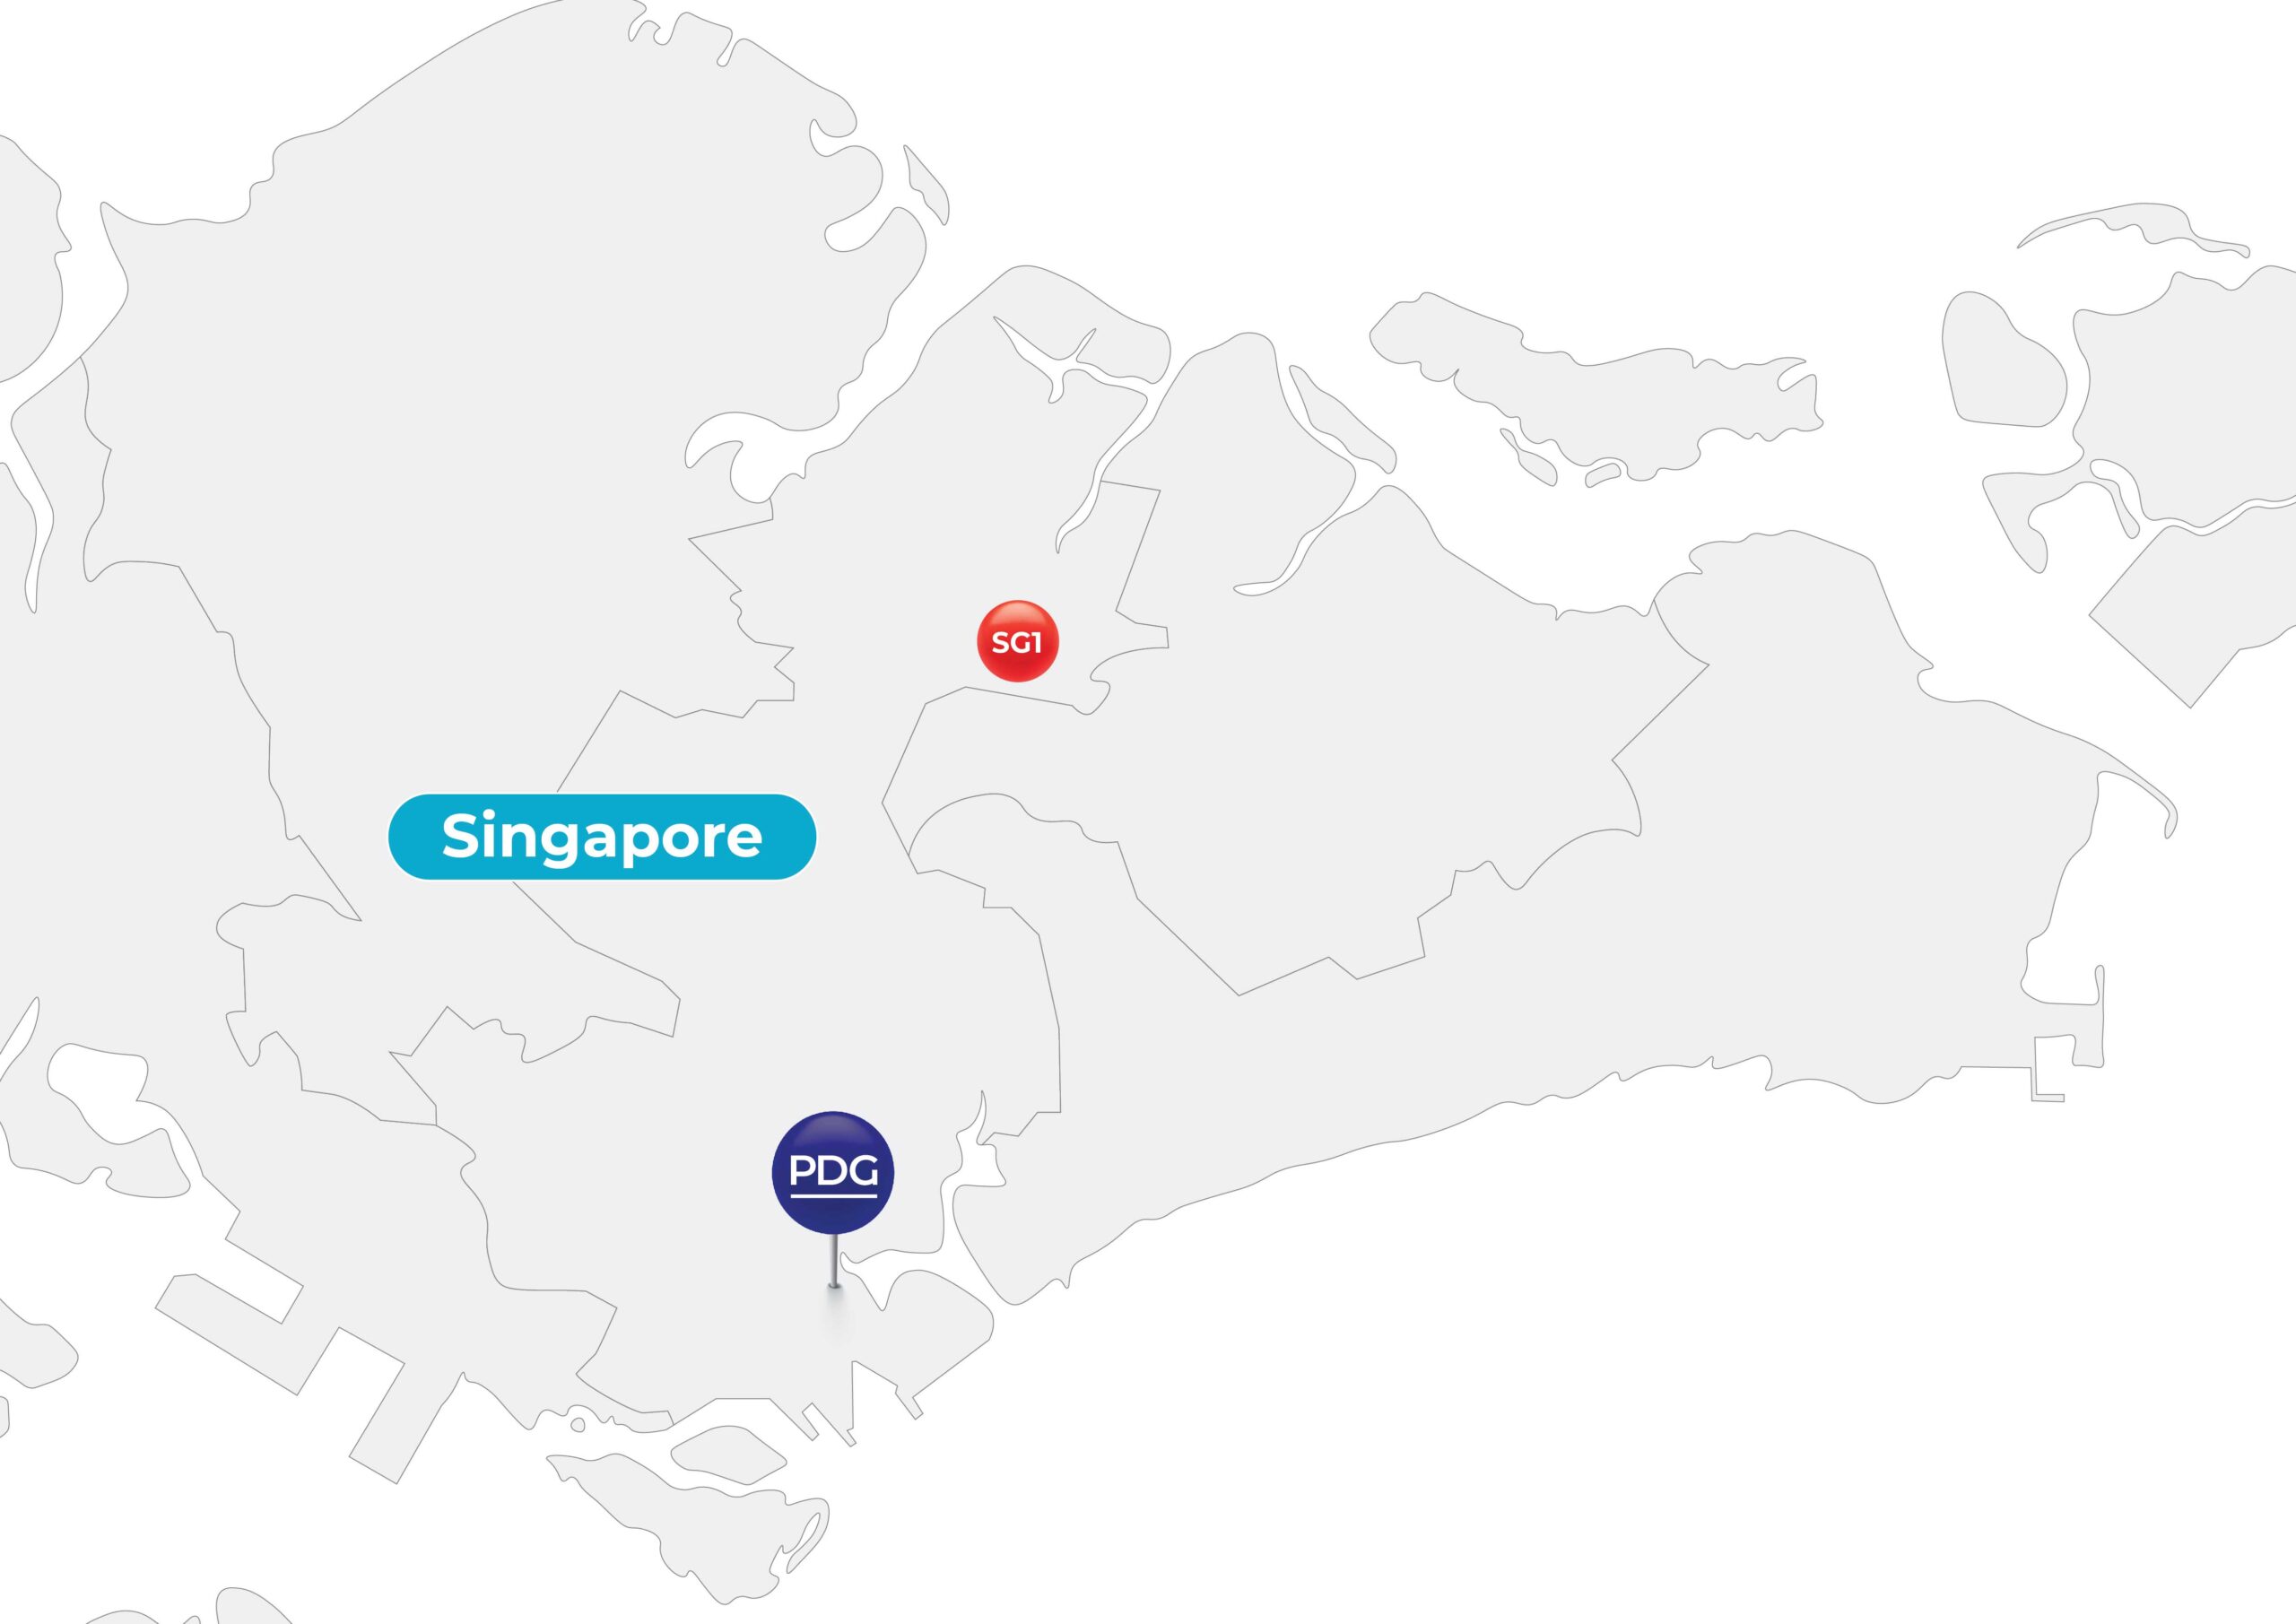 Map of Singapore and PDG Presence